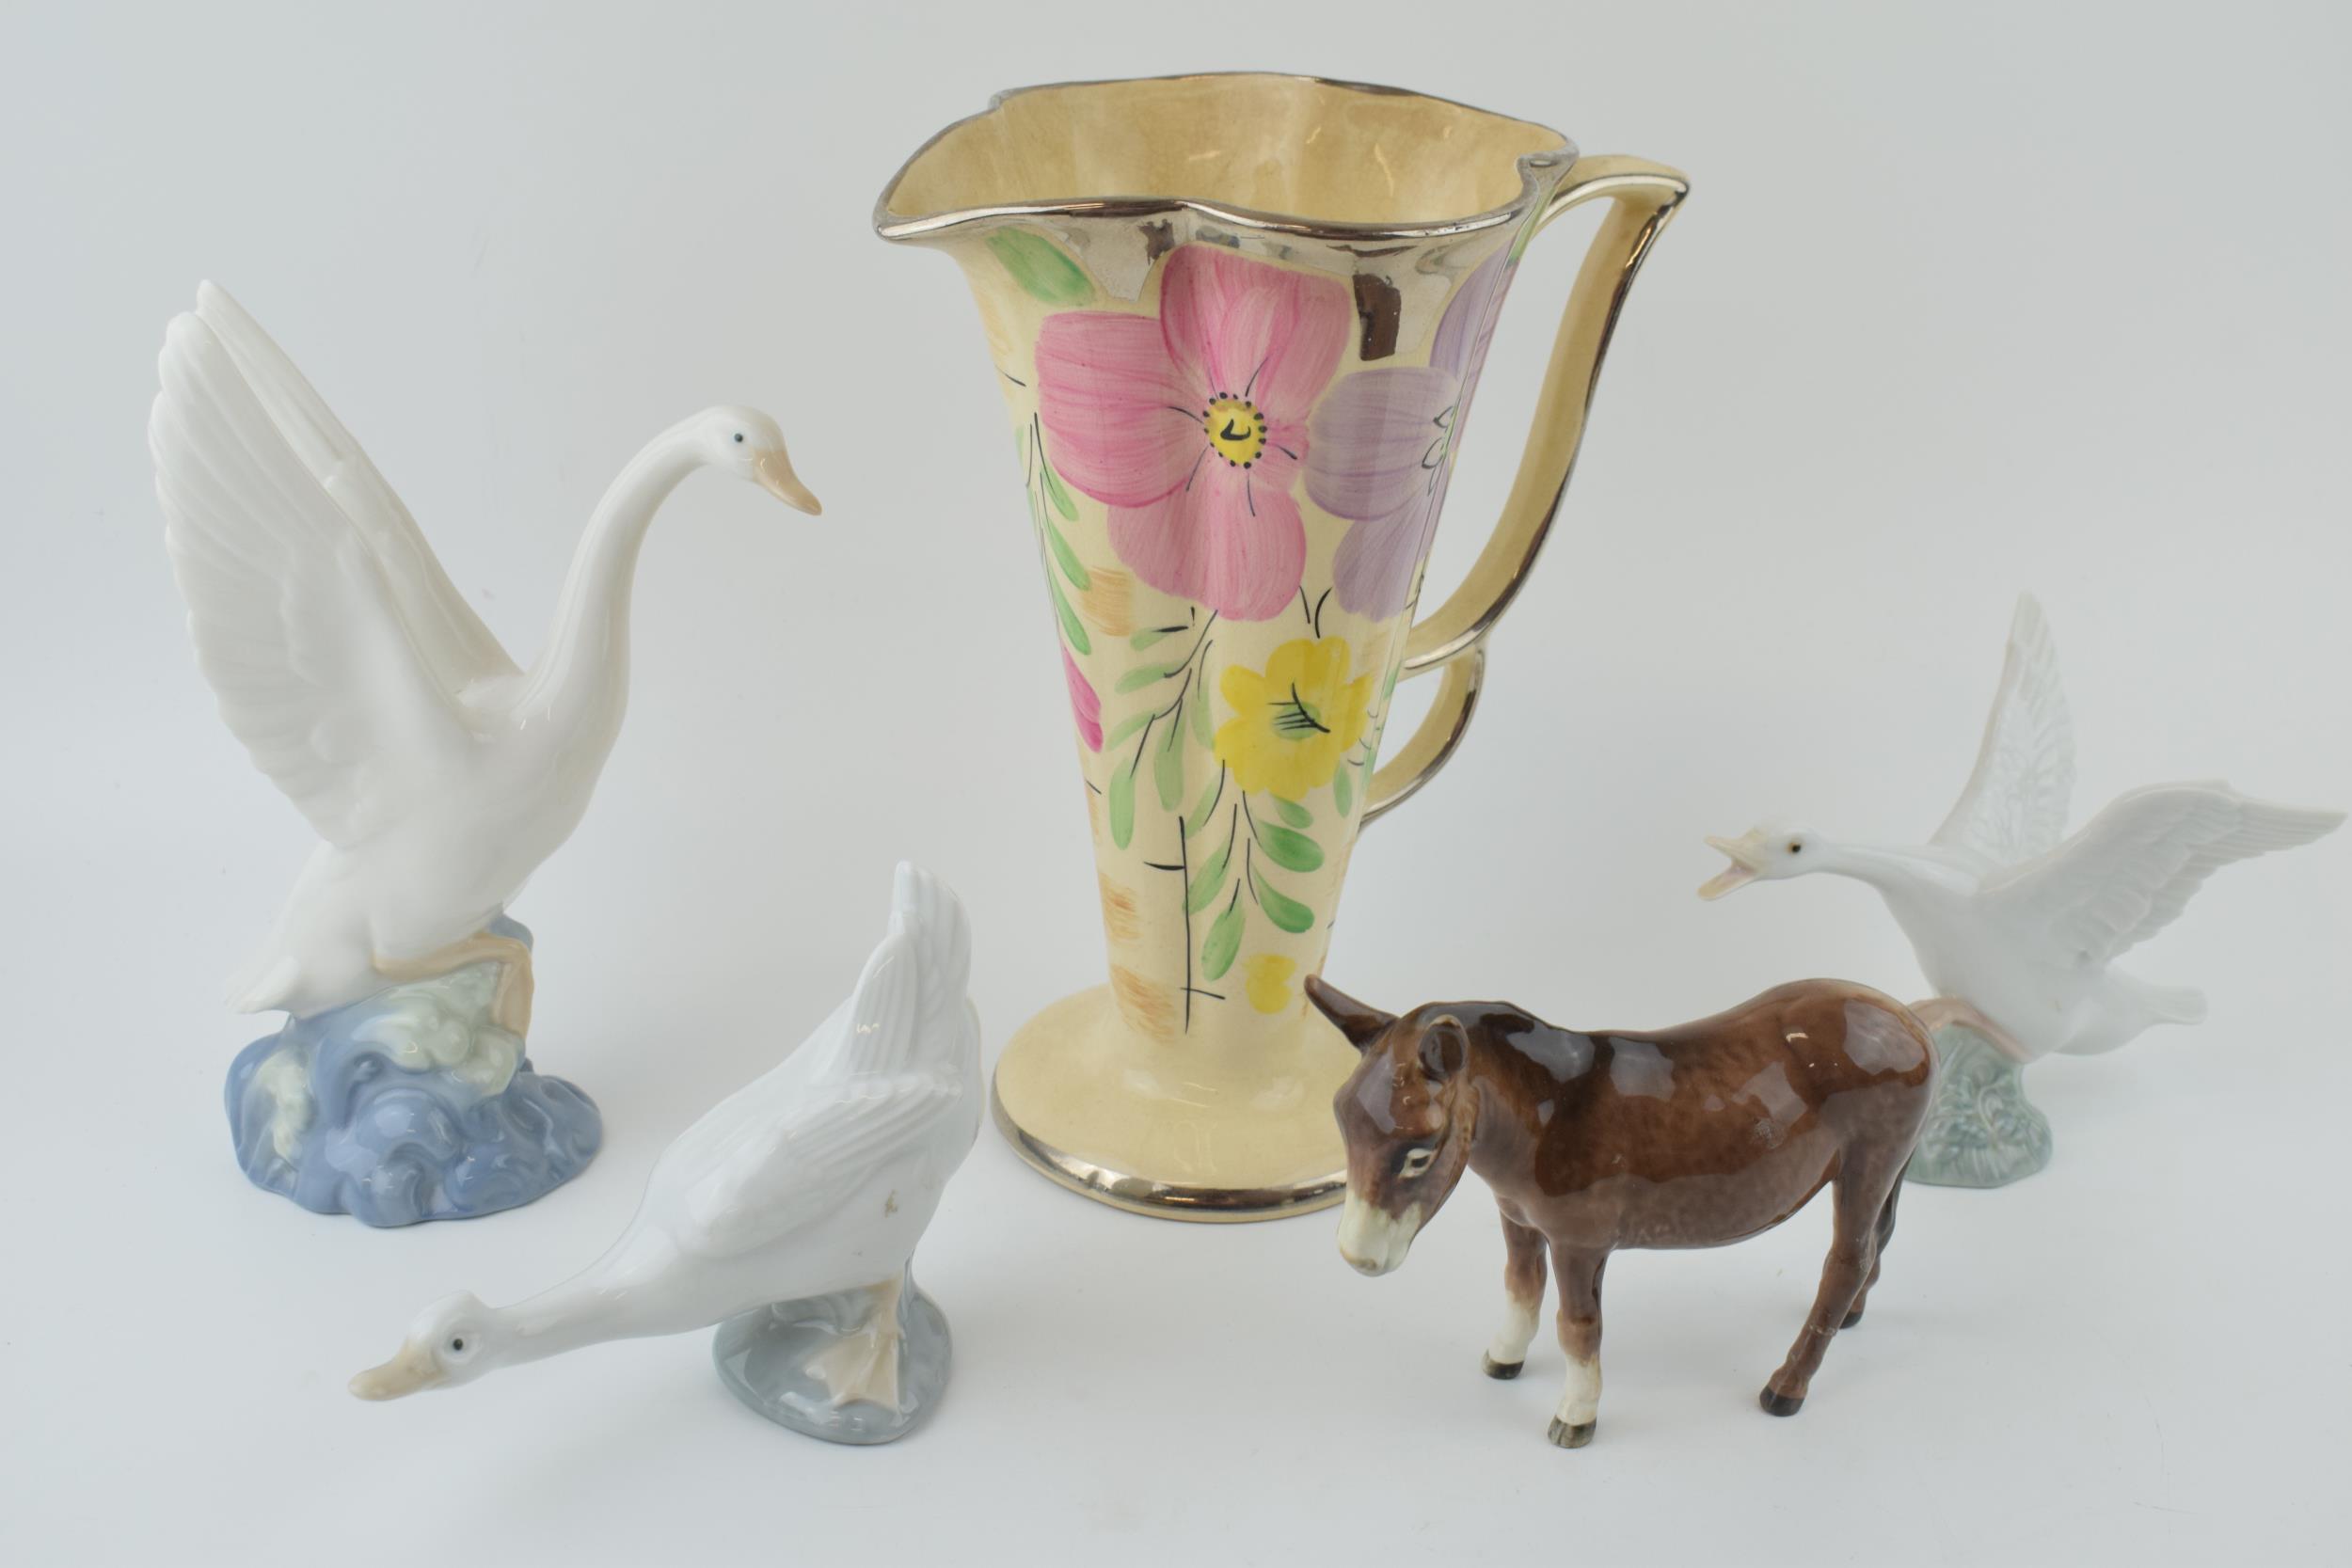 An Arthur Wood floral Art Deco vase with a Beswick donkey (af), with 2 Nao geese and a Lladro